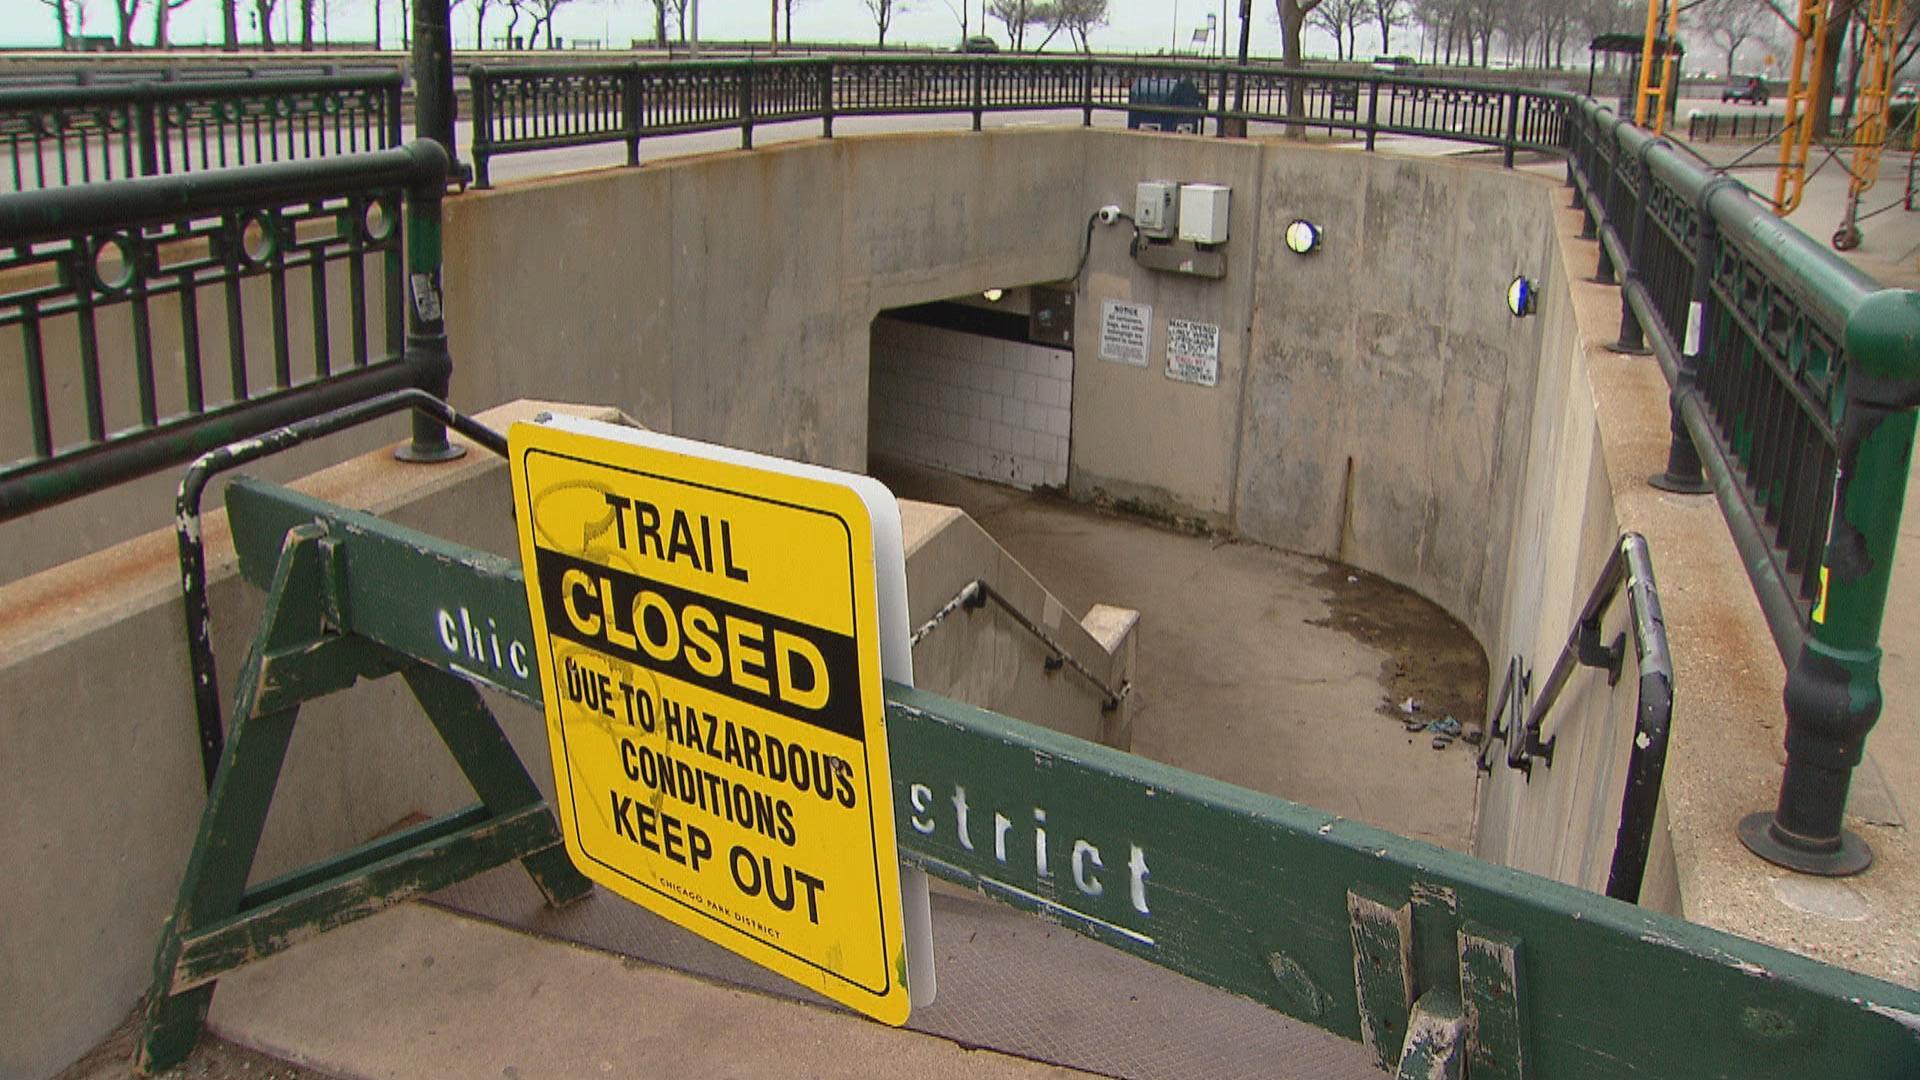 Chicago’s lakefront trail has been closed since March 26. (WTTW News)